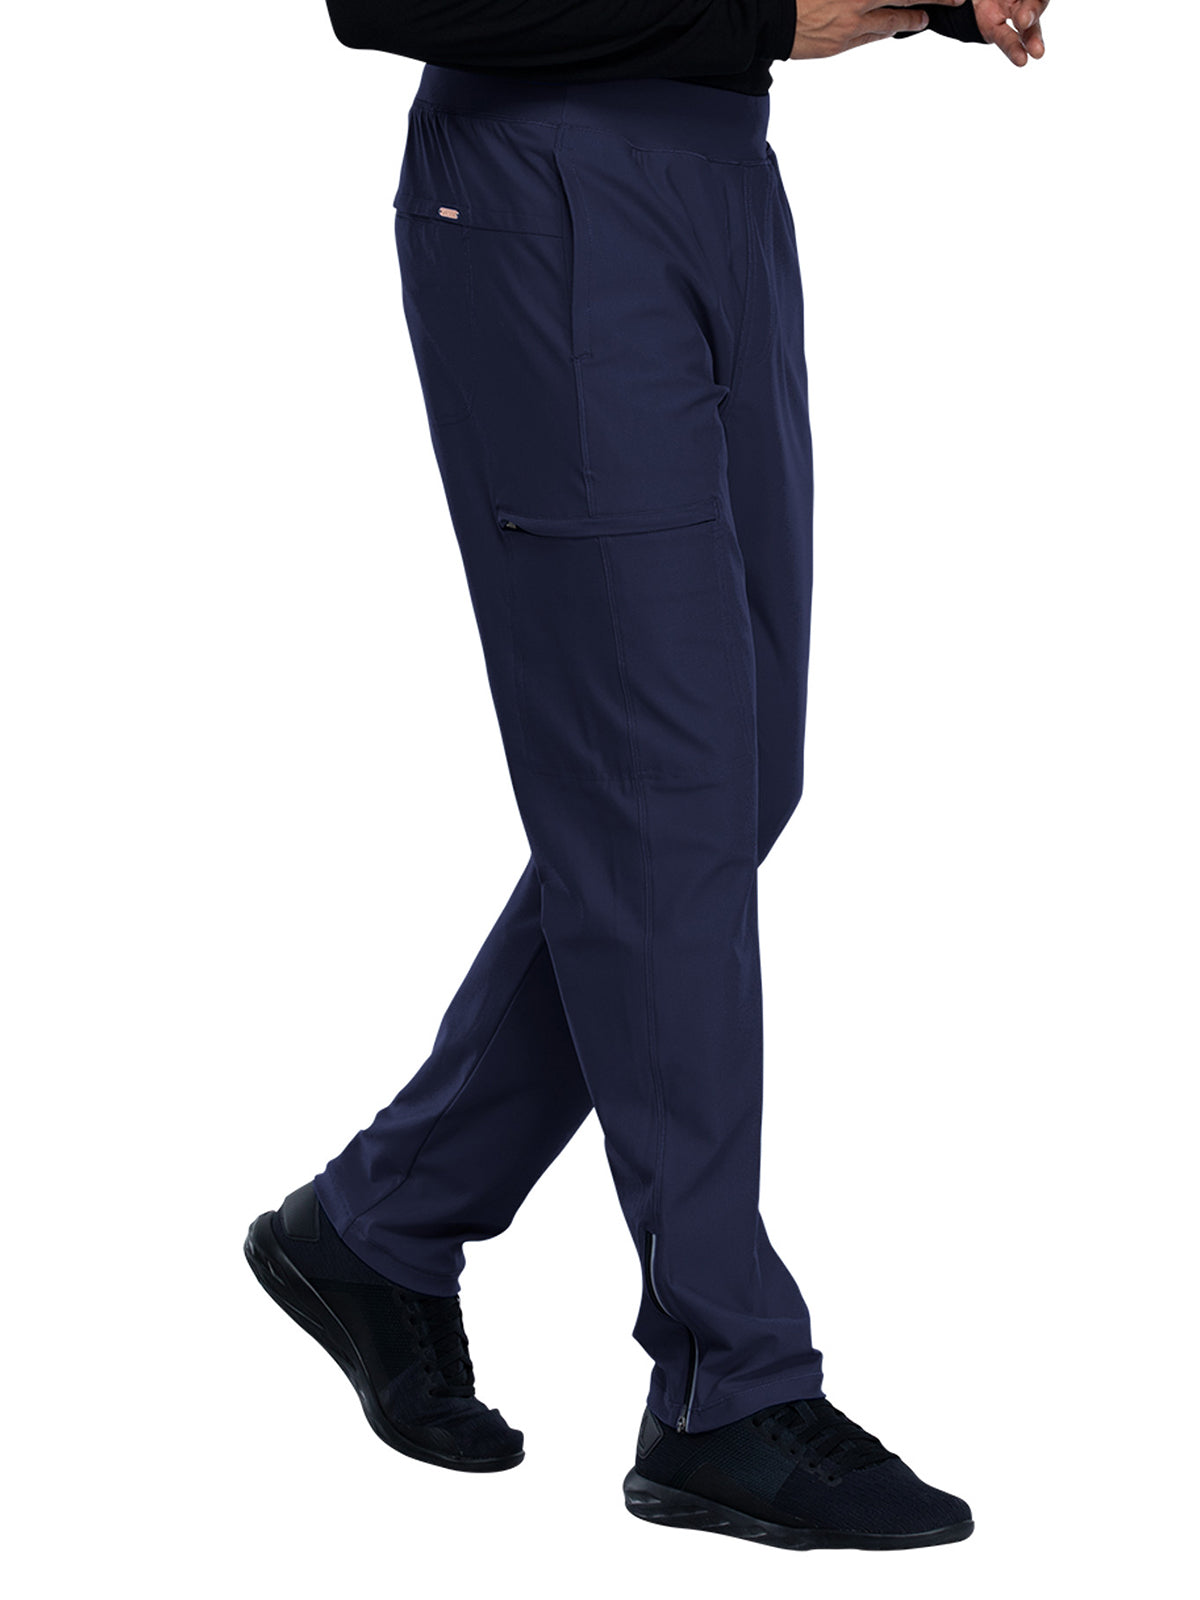 Men's Faux Front Fly Tapered Leg Pull-on Scrub Pant - CK185 - Navy